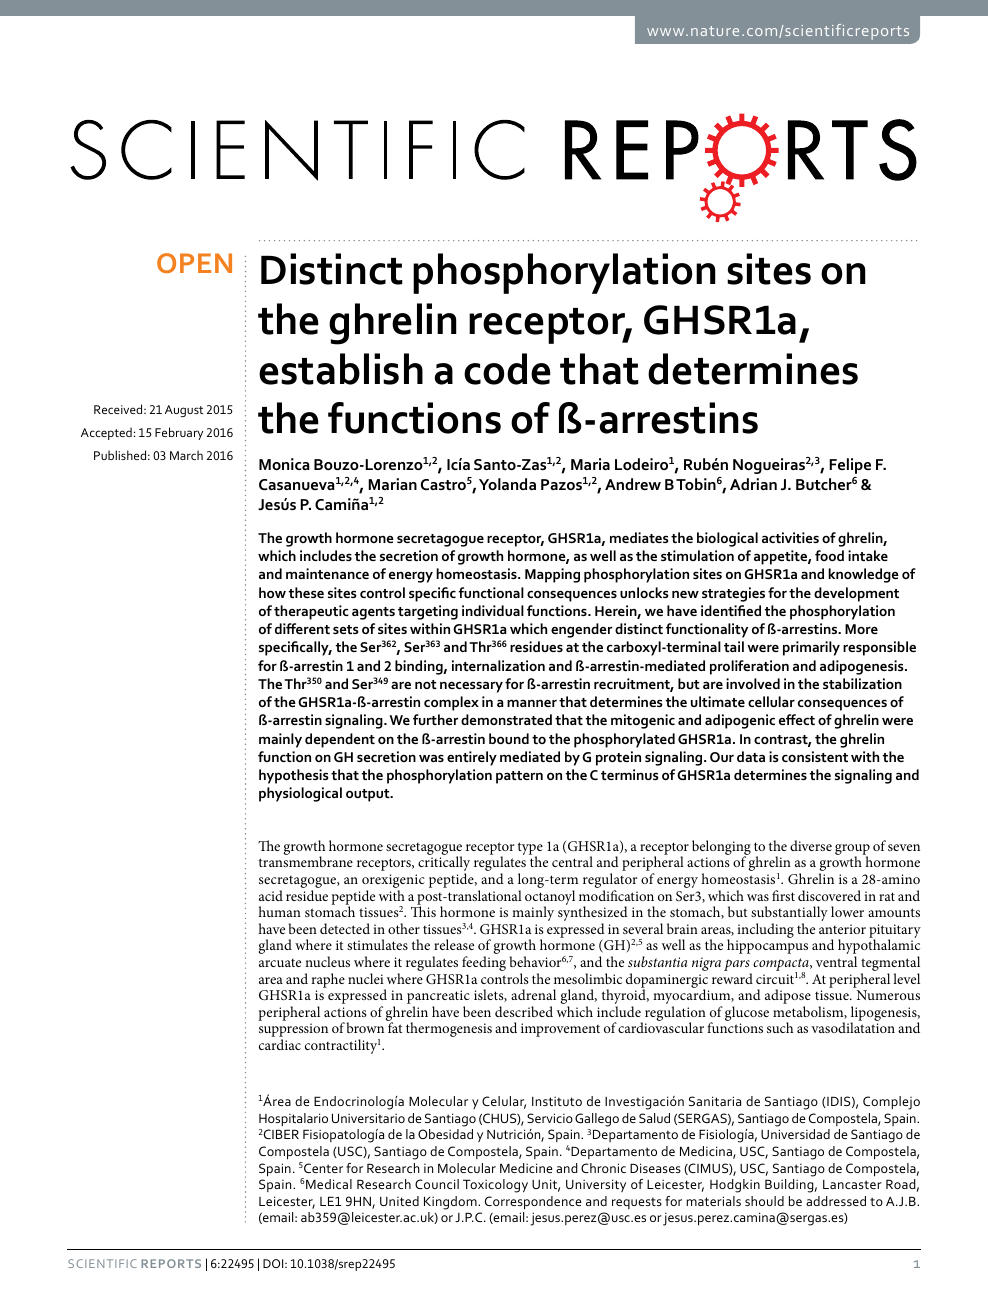 Distinct Phosphorylation Sites On The Ghrelin Receptor Ghsr1a Establish A Code That Determines The Functions Of Ss Arrestins Topic Of Research Paper In Biological Sciences Download Scholarly Article Pdf And Read For